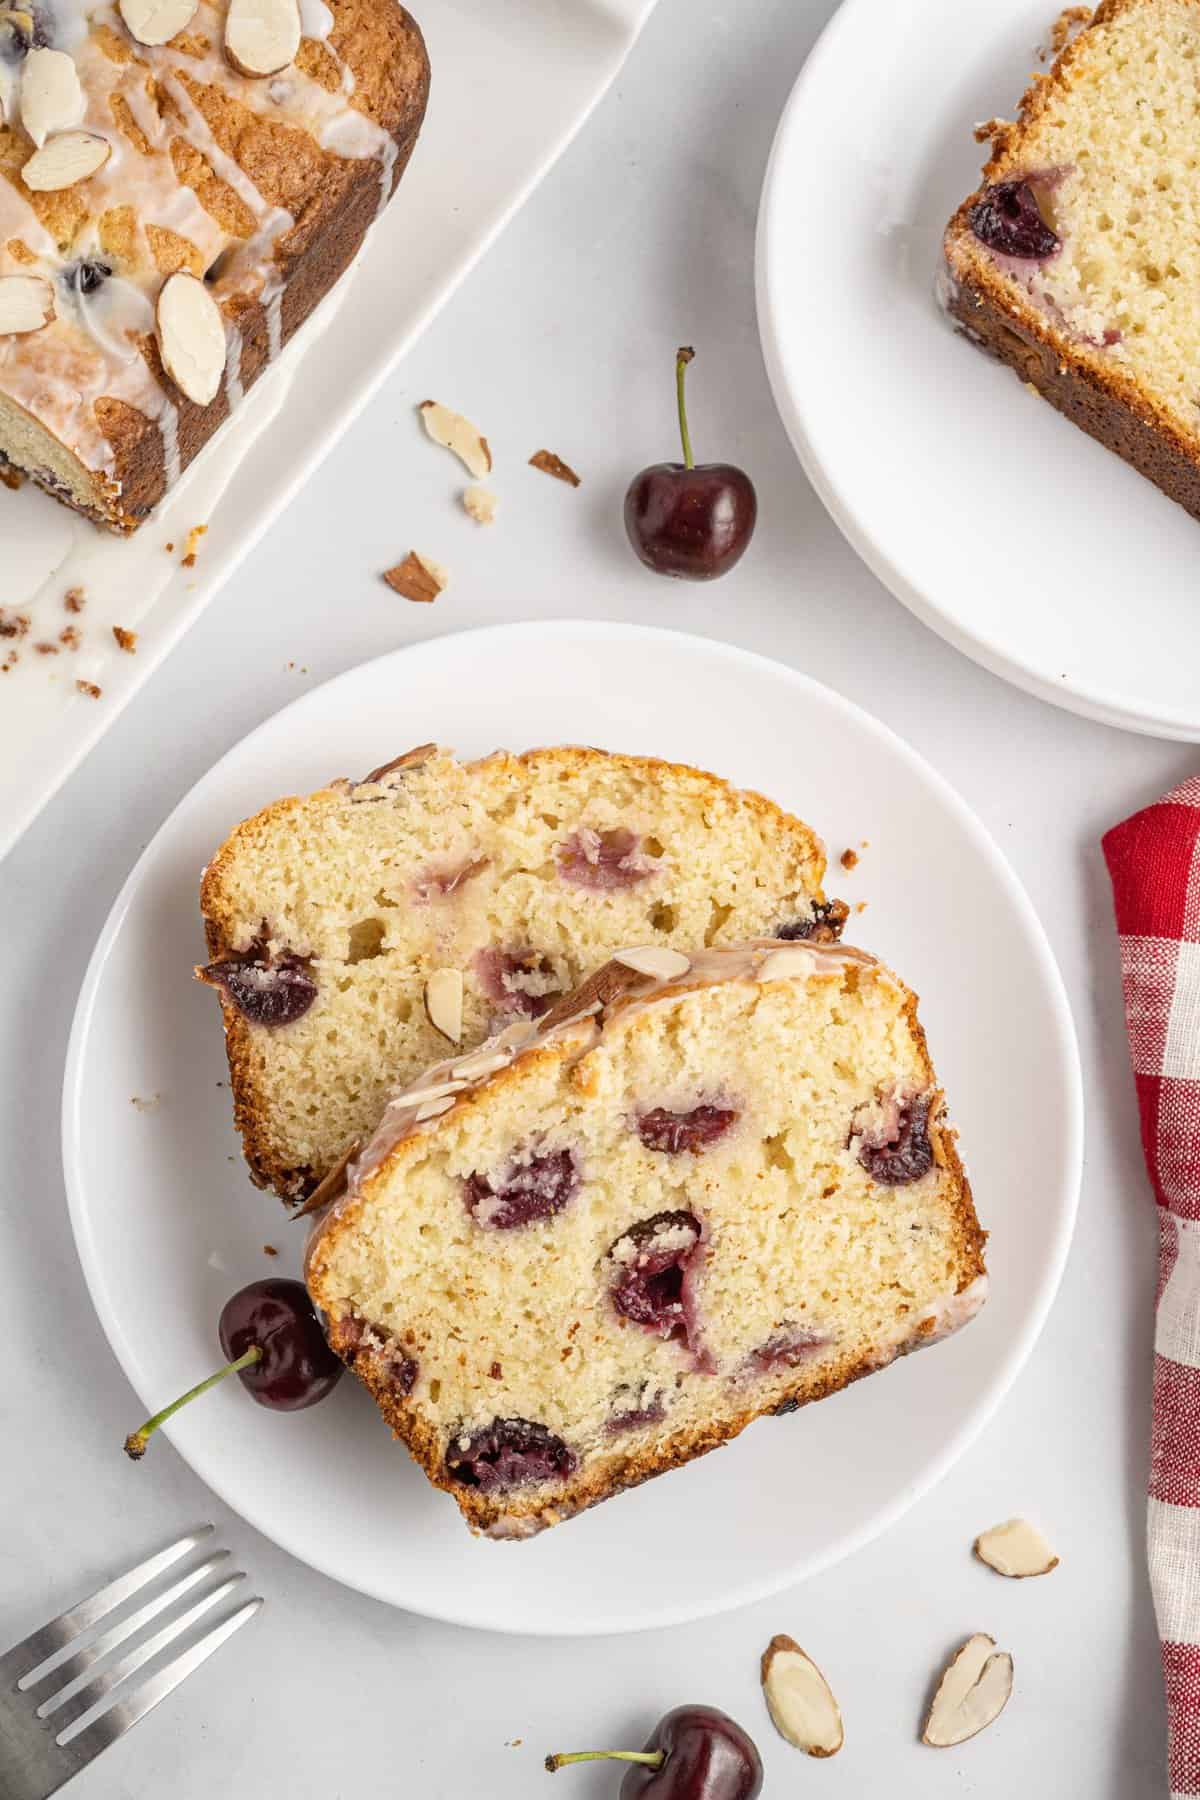 Two slices of cherry bread on white plate with red and white dishtowel next to it.